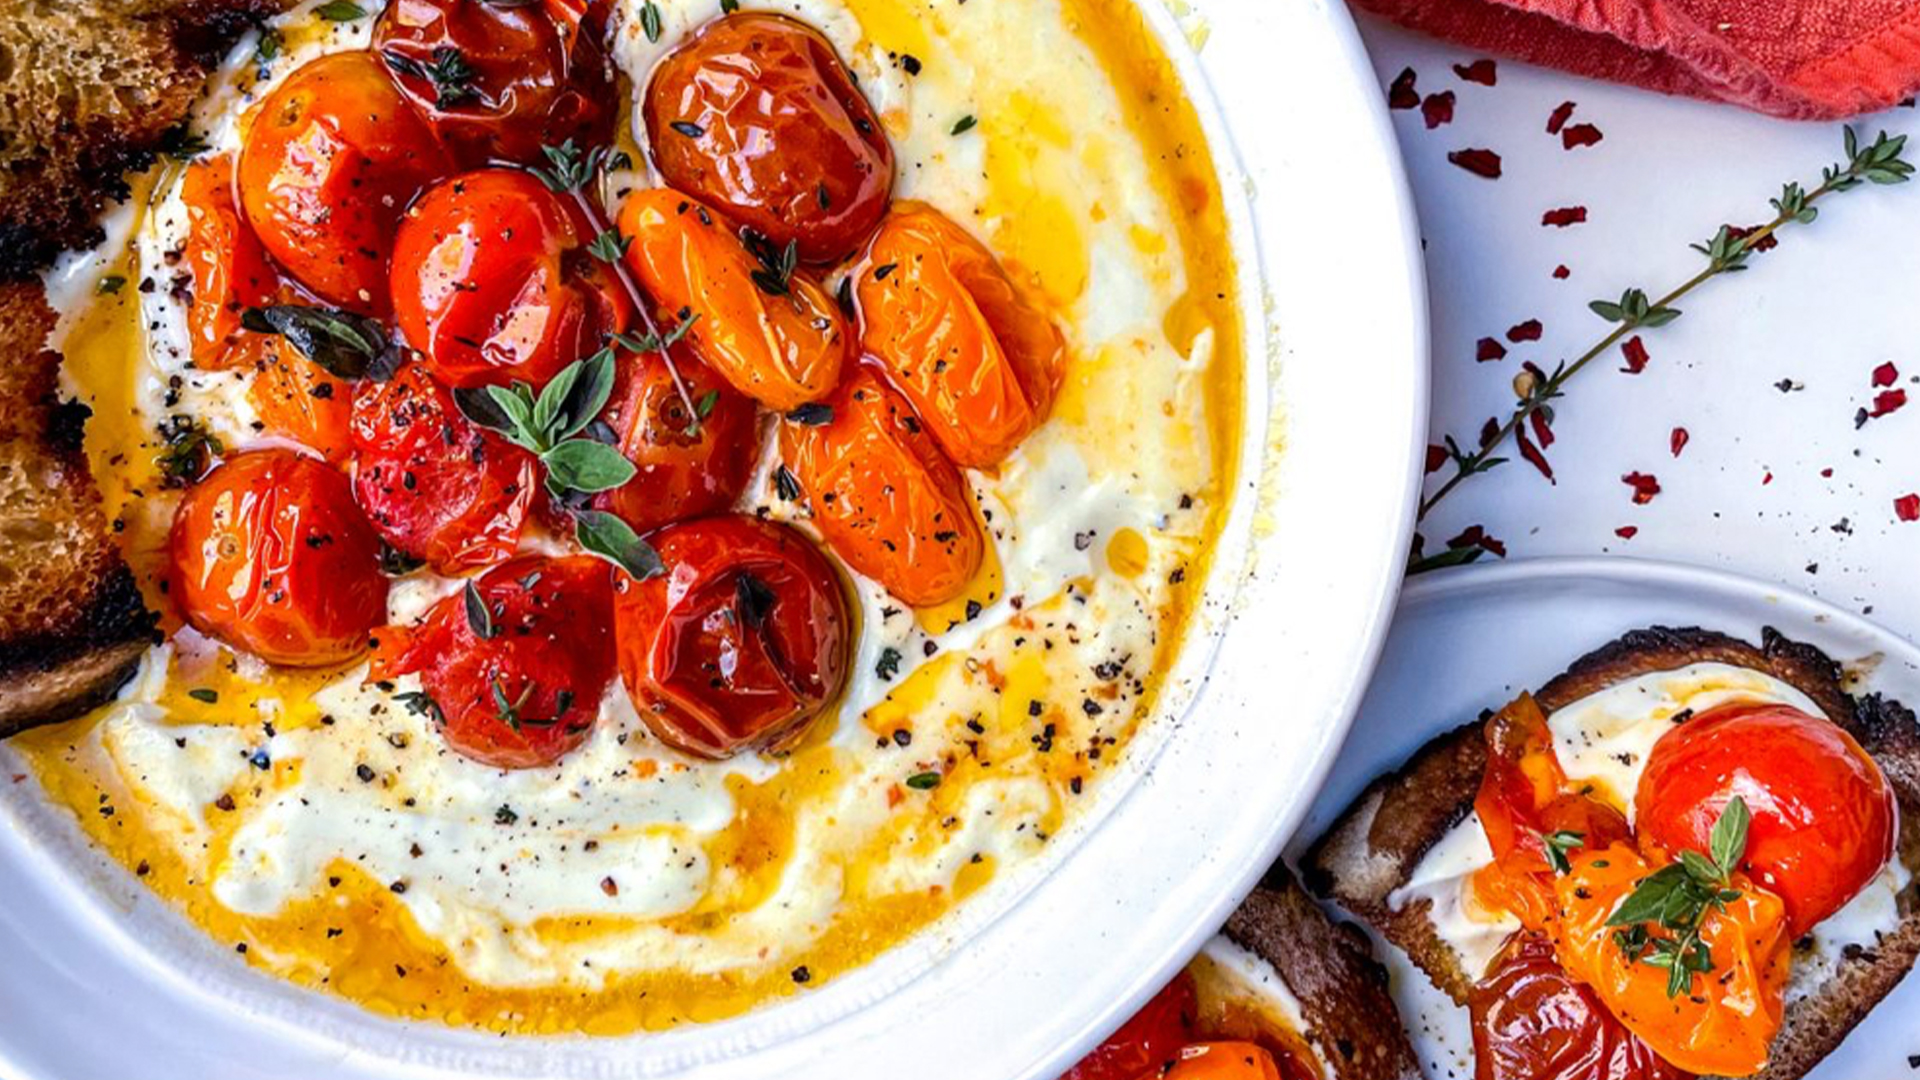 Whipped feta dip with roasted garlic, tomatoes and olives